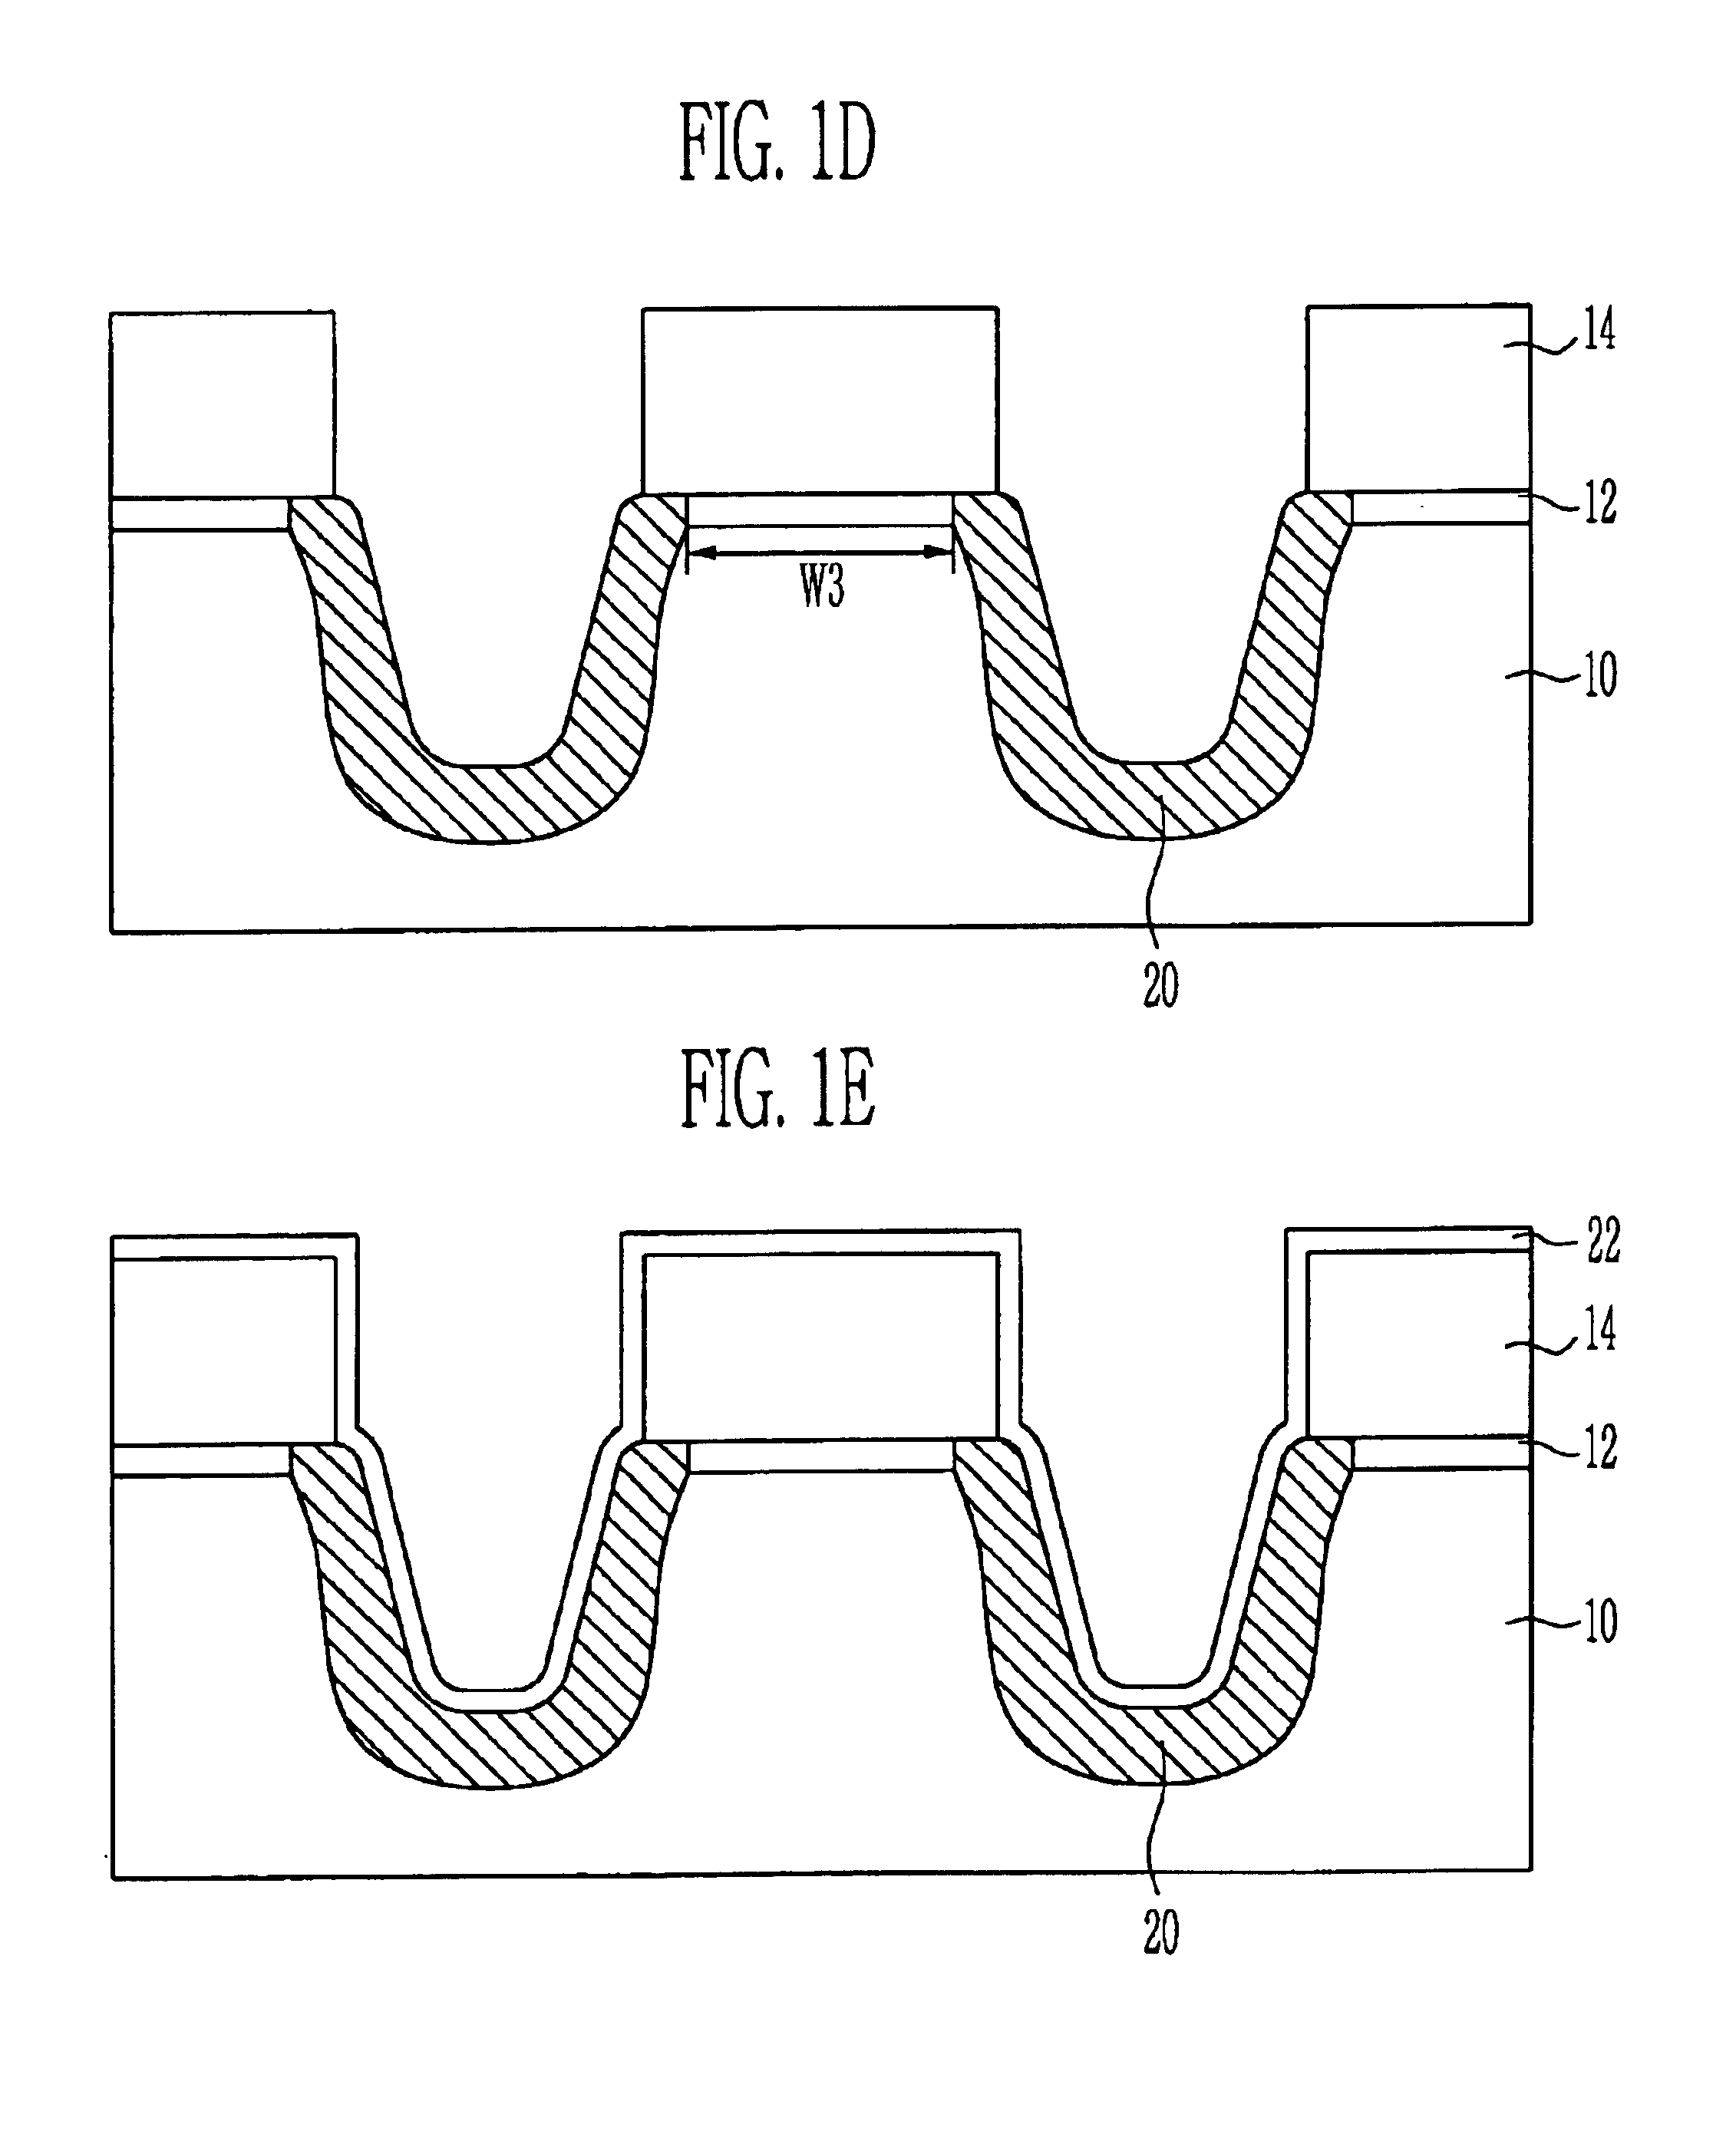 Method of manufacturing a flash memory cell using a self-aligned floating gate